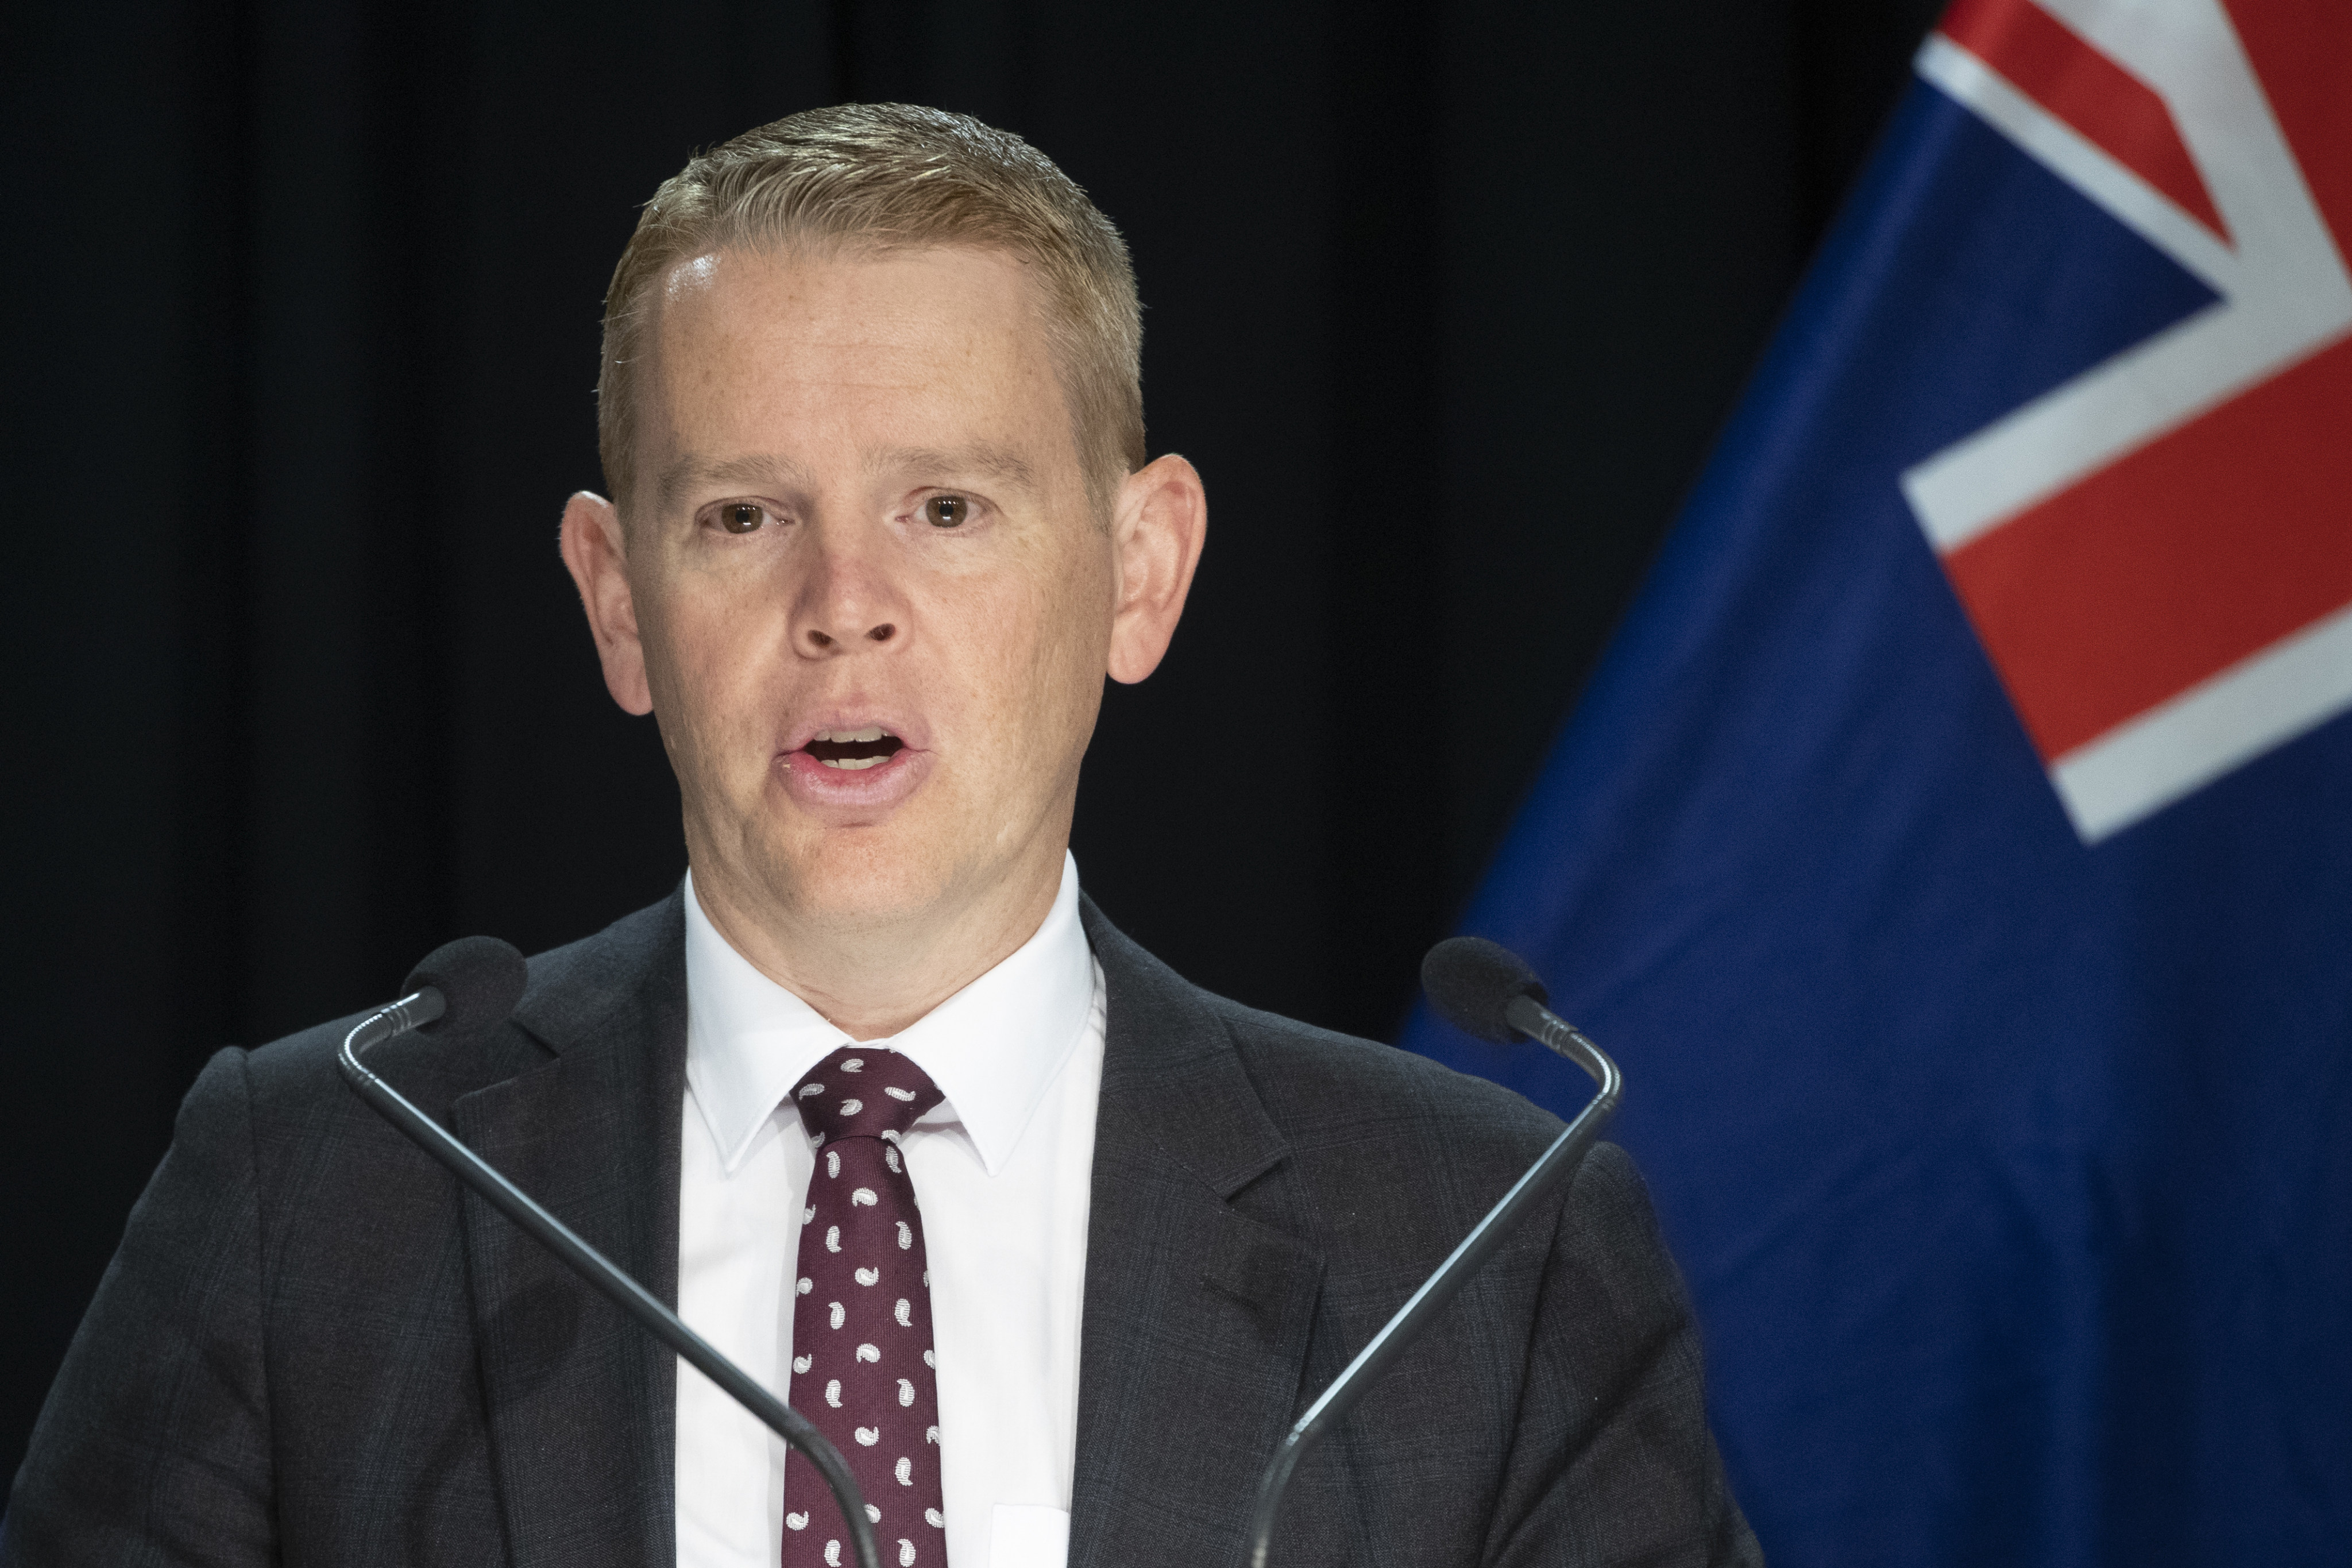 New Zealand Prime Minister Chris Hipkins. Hours before he was due to depart for the UK to attend the coronation of King Charles III, he said he personally favours his country becoming a republic. Photo: via AP